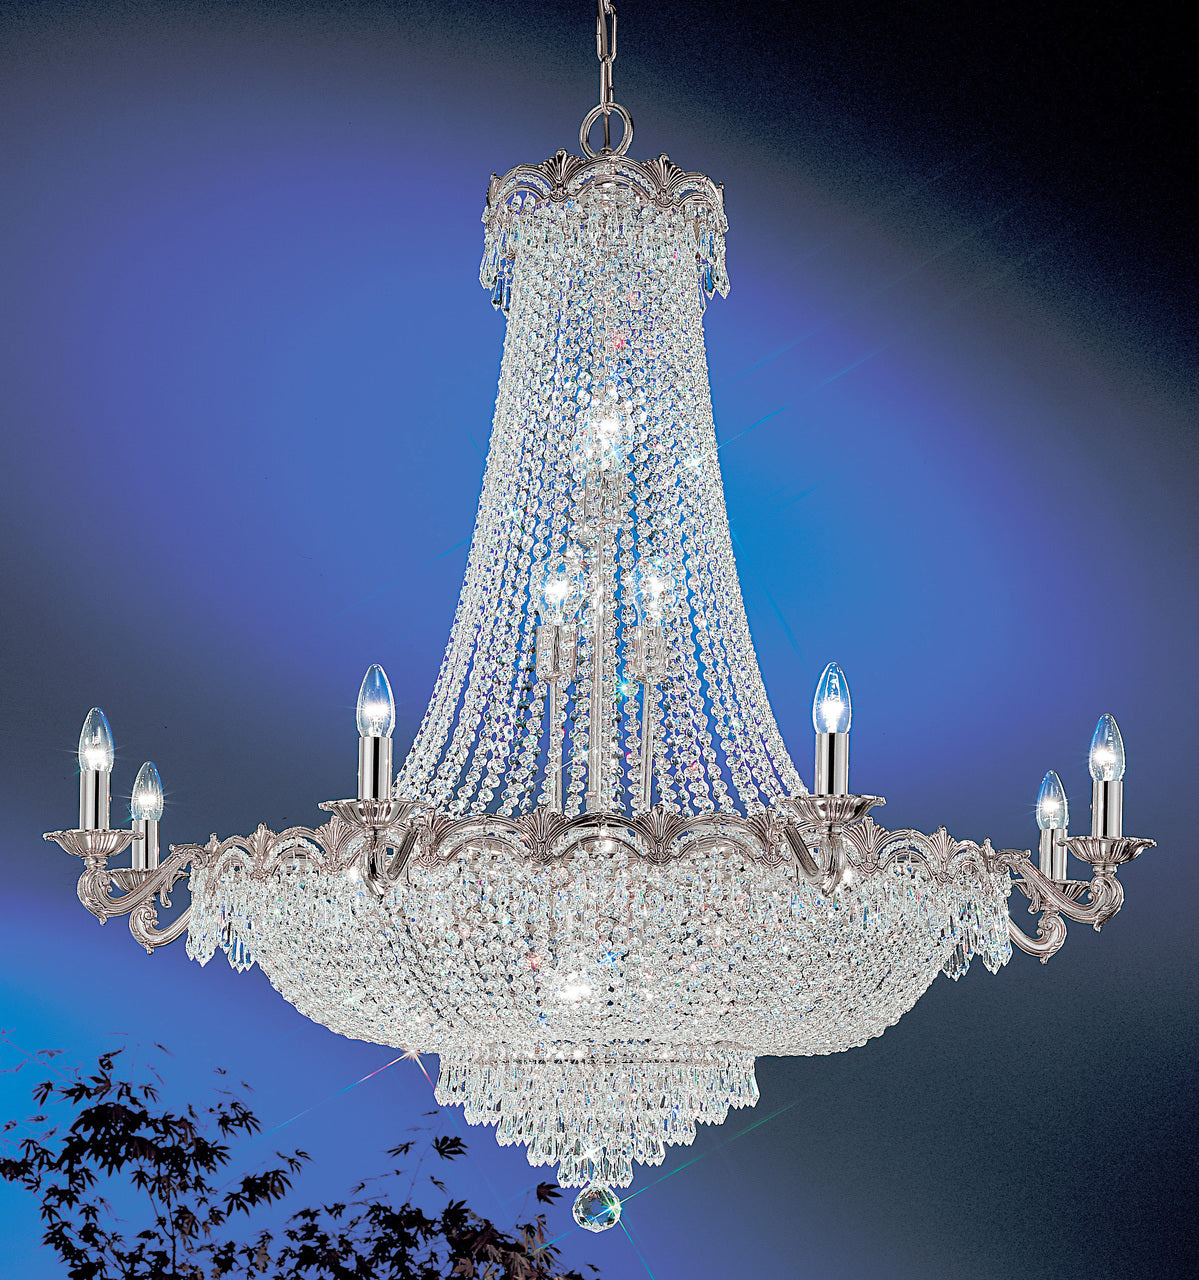 Classic Lighting 1860 CHB SC Regency II Crystal Chandelier in Chrome/Black Patina (Imported from Spain)